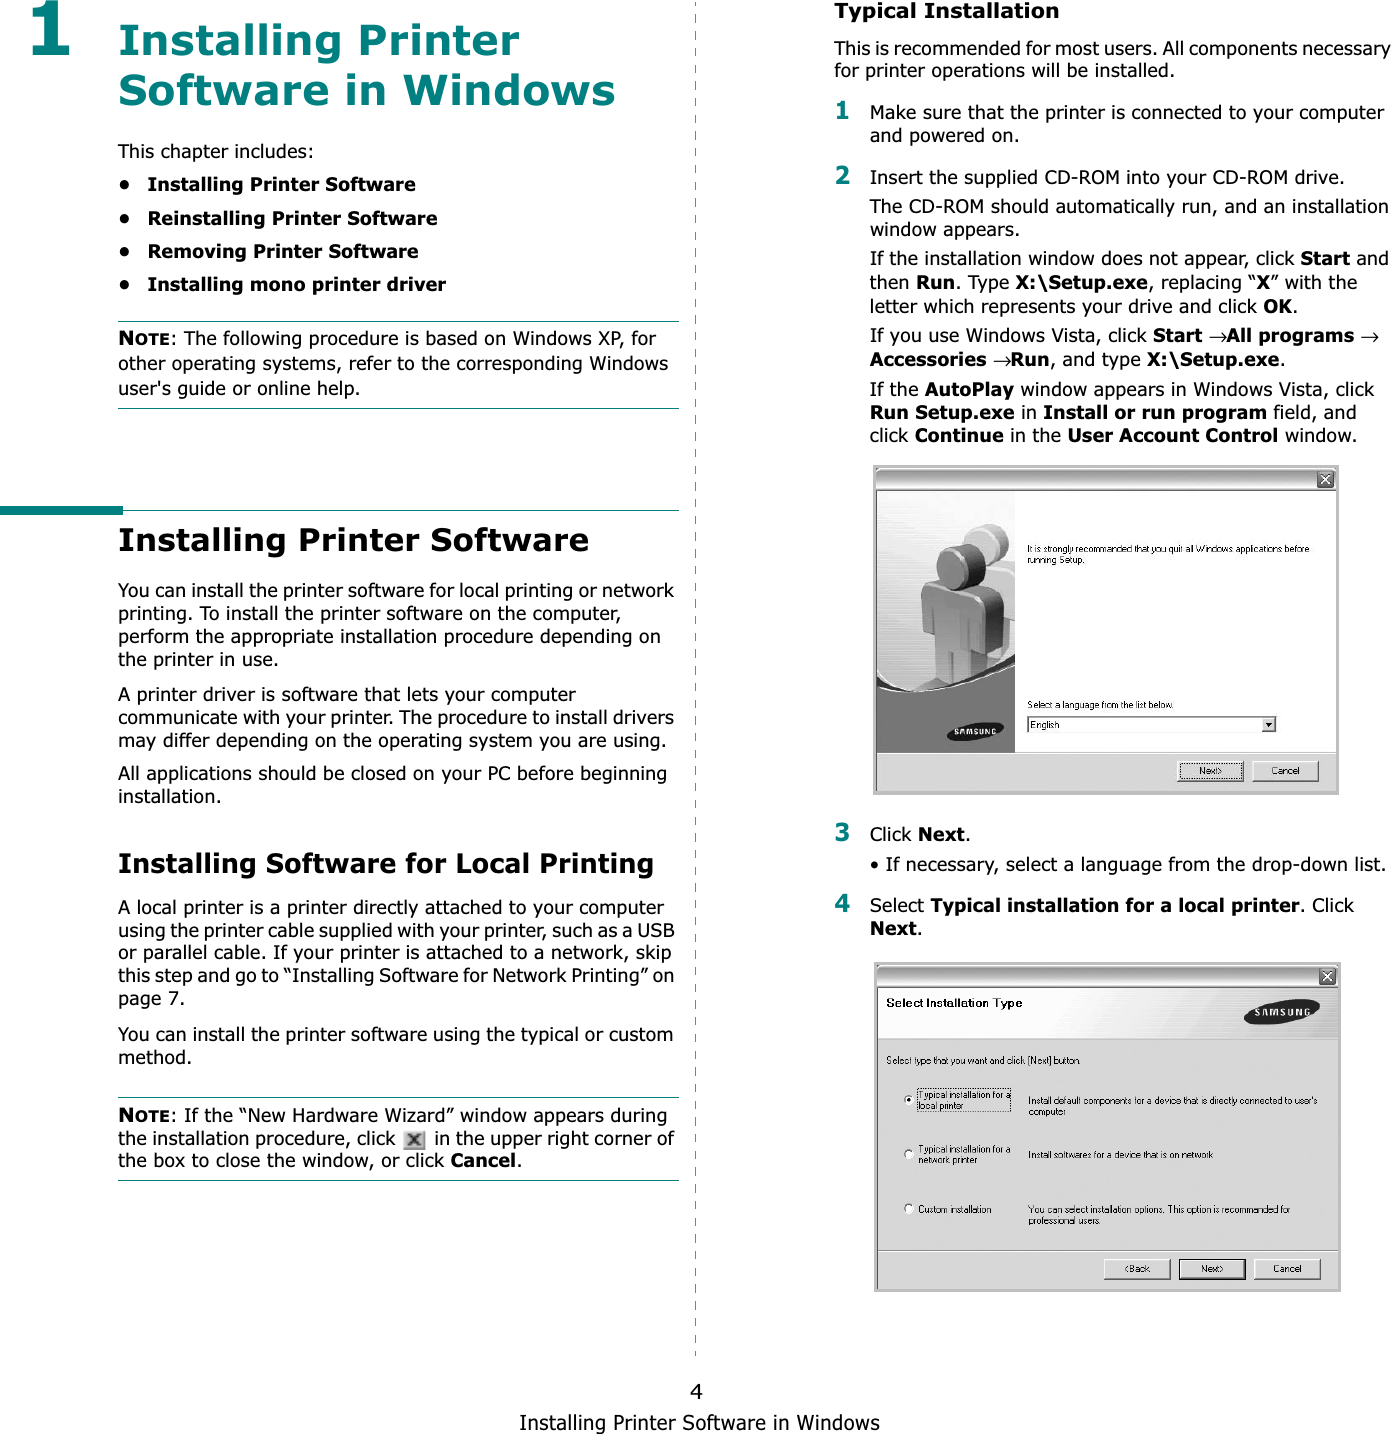 Installing Printer Software in Windows41Installing Printer Software in WindowsThis chapter includes:• Installing Printer Software• Reinstalling Printer Software•Removing Printer Software• Installing mono printer driverNOTE: The following procedure is based on Windows XP, for other operating systems, refer to the corresponding Windows user&apos;s guide or online help.Installing Printer SoftwareYou can install the printer software for local printing or network printing. To install the printer software on the computer, perform the appropriate installation procedure depending on the printer in use.A printer driver is software that lets your computer communicate with your printer. The procedure to install drivers may differ depending on the operating system you are using.All applications should be closed on your PC before beginning installation. Installing Software for Local PrintingA local printer is a printer directly attached to your computer using the printer cable supplied with your printer, such as a USB or parallel cable. If your printer is attached to a network, skip this step and go to “Installing Software for Network Printing” on page 7.You can install the printer software using the typical or custom method.NOTE: If the “New Hardware Wizard” window appears during the installation procedure, click   in the upper right corner of the box to close the window, or click Cancel.Typical InstallationThis is recommended for most users. All components necessary for printer operations will be installed.1Make sure that the printer is connected to your computer and powered on.2Insert the supplied CD-ROM into your CD-ROM drive.The CD-ROM should automatically run, and an installation window appears.If the installation window does not appear, click Start and then Run. Type X:\Setup.exe, replacing “X” with the letter which represents your drive and click OK.If you use Windows Vista, click Start→All programs→ Accessories→Run, and type X:\Setup.exe.If the AutoPlay window appears in Windows Vista, click Run Setup.exe in Install or run program field, and clickContinue in the User Account Control window.3Click Next.• If necessary, select a language from the drop-down list.4Select Typical installation for a local printer. Click Next.